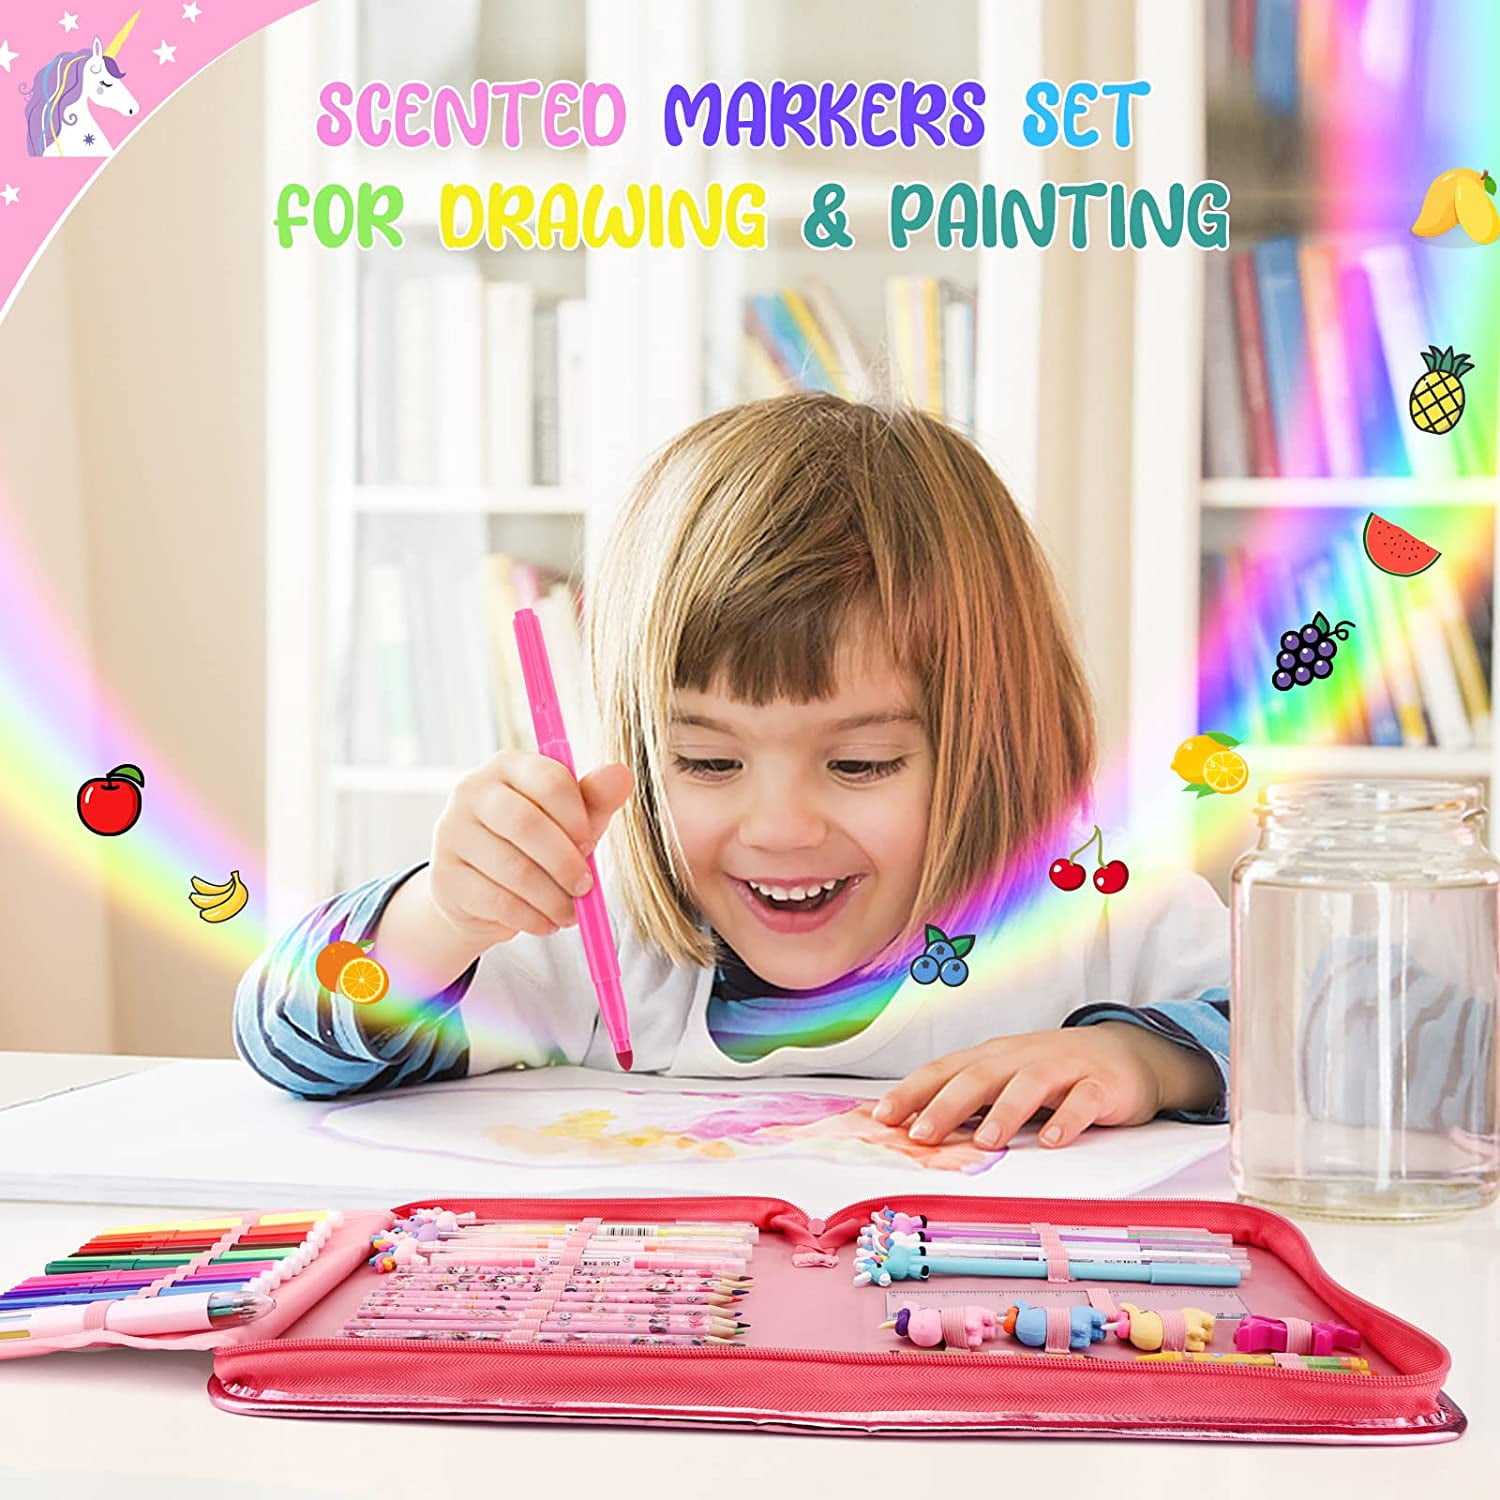 Reductus Fruit Scented Washable Markers Set for Kids with Unicorn Pencil Case, 48pcs Art Supplies for Kids Age 4-6-8, Perfect Birthday Unicorns Gifts